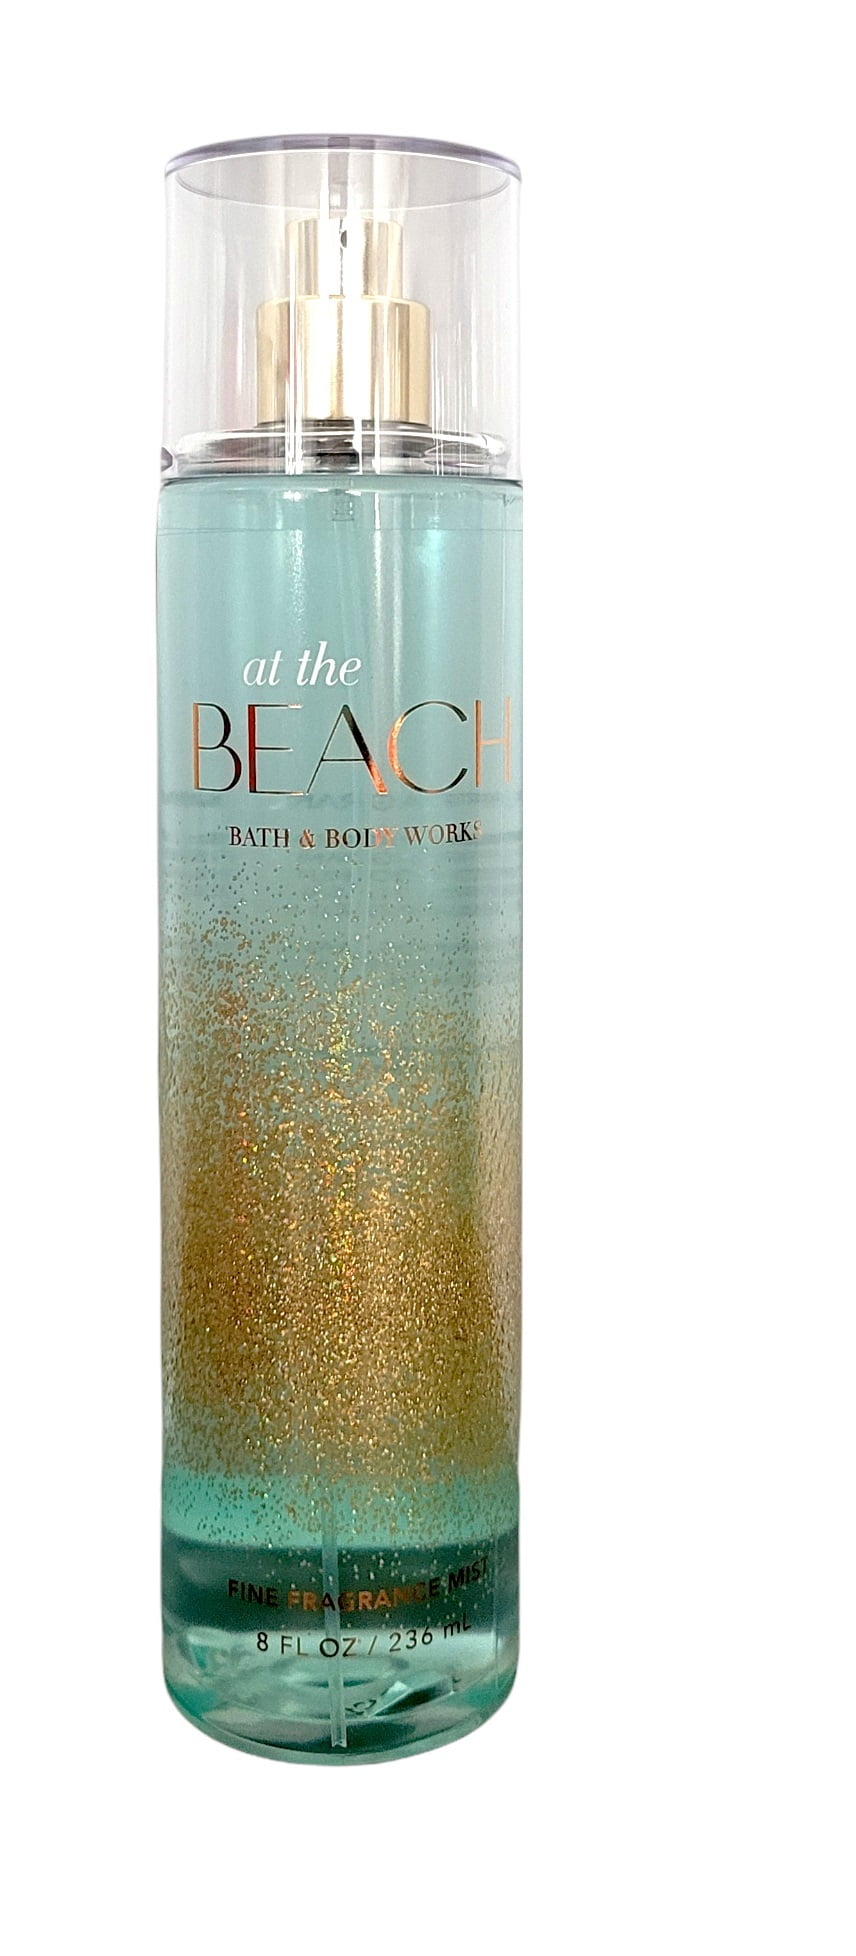 at the beach scent bath and body works